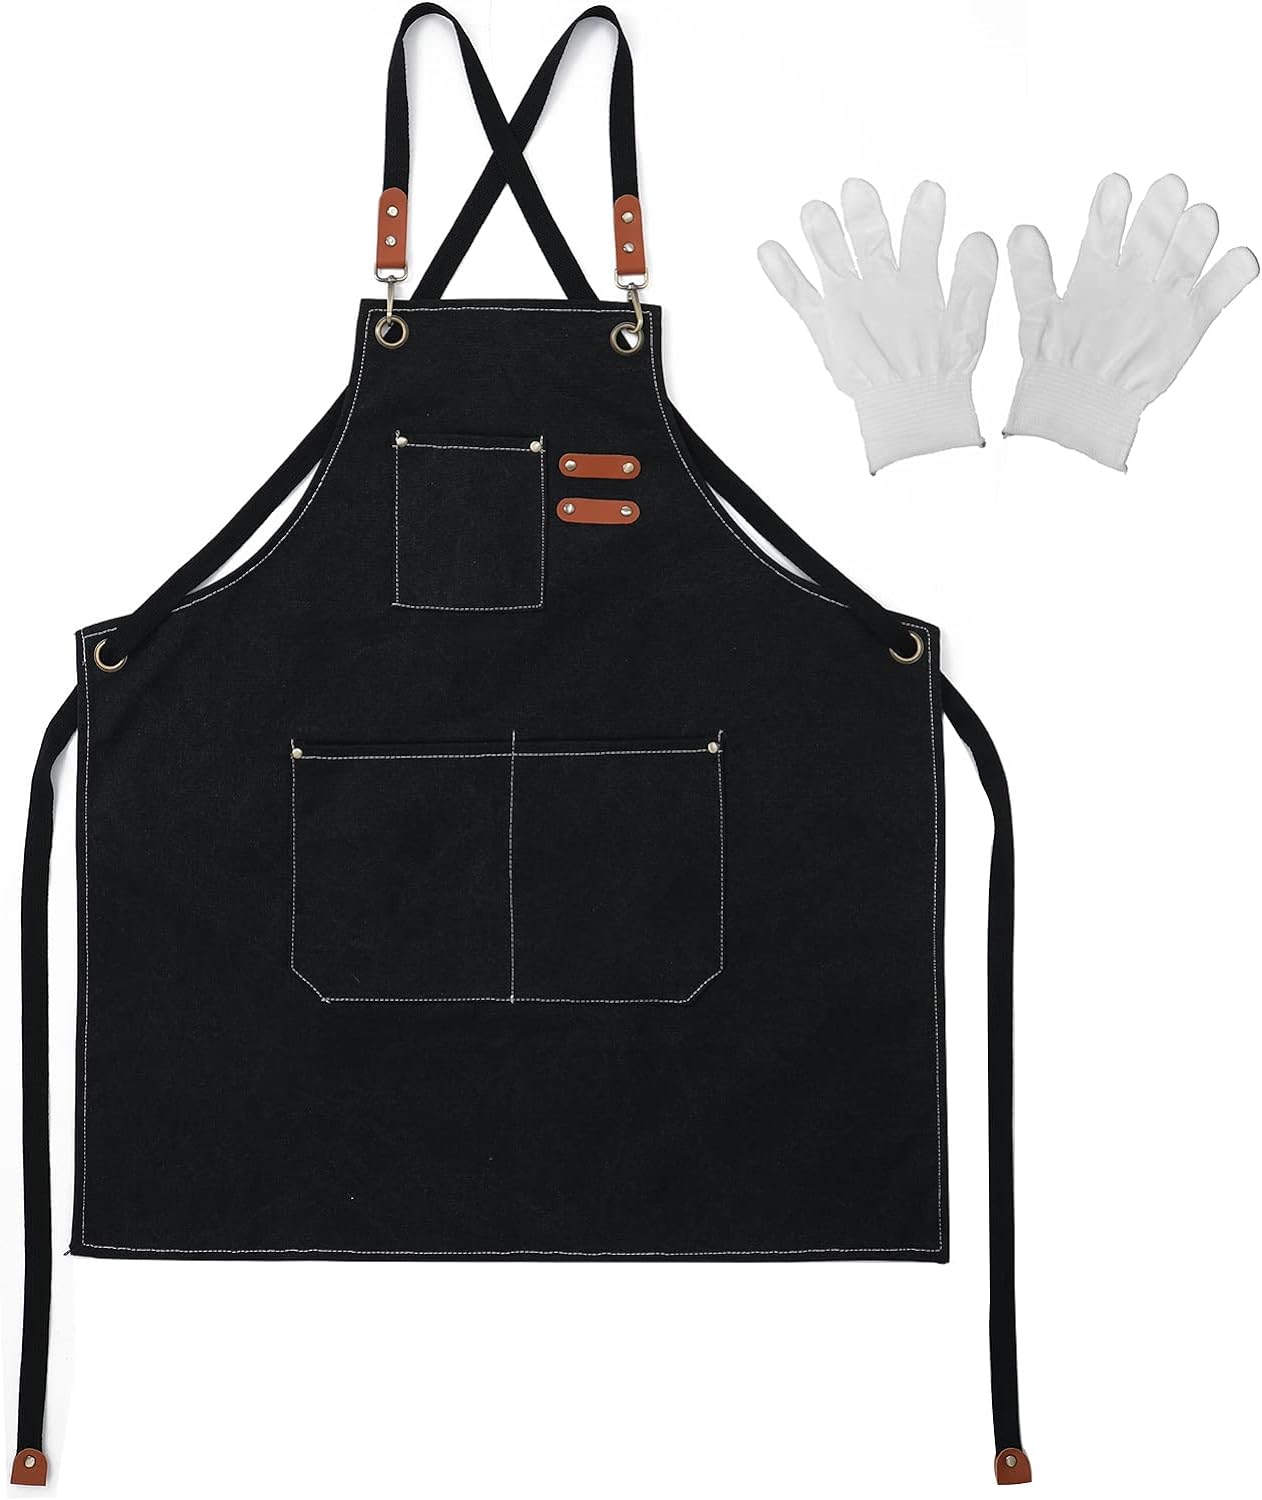 Generic Wear Resistant Cross Back Apron Waterproof Breathable Canvas Woodworking Chef Apron with Large Pockets Suitable for Men Women